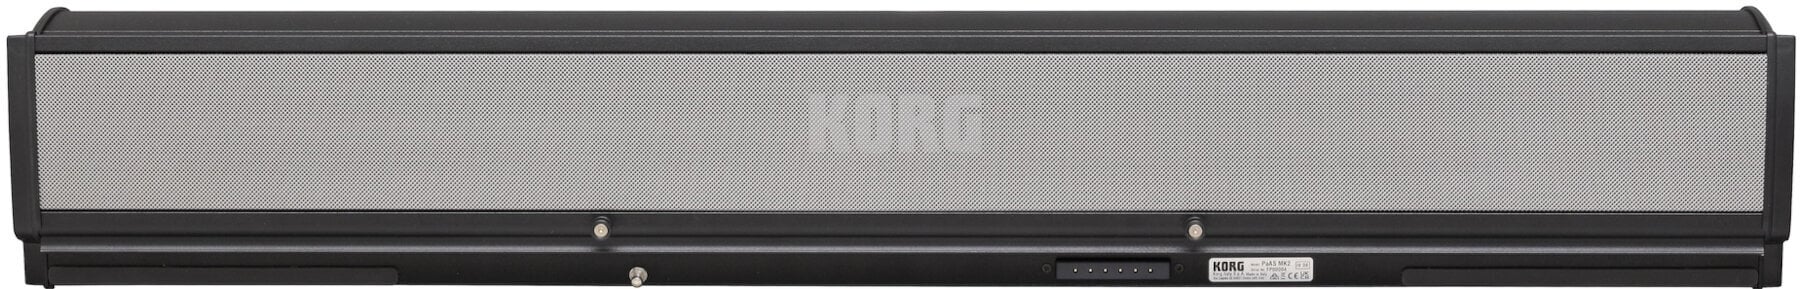 Amplfication pour clavier Korg PaAS MK2